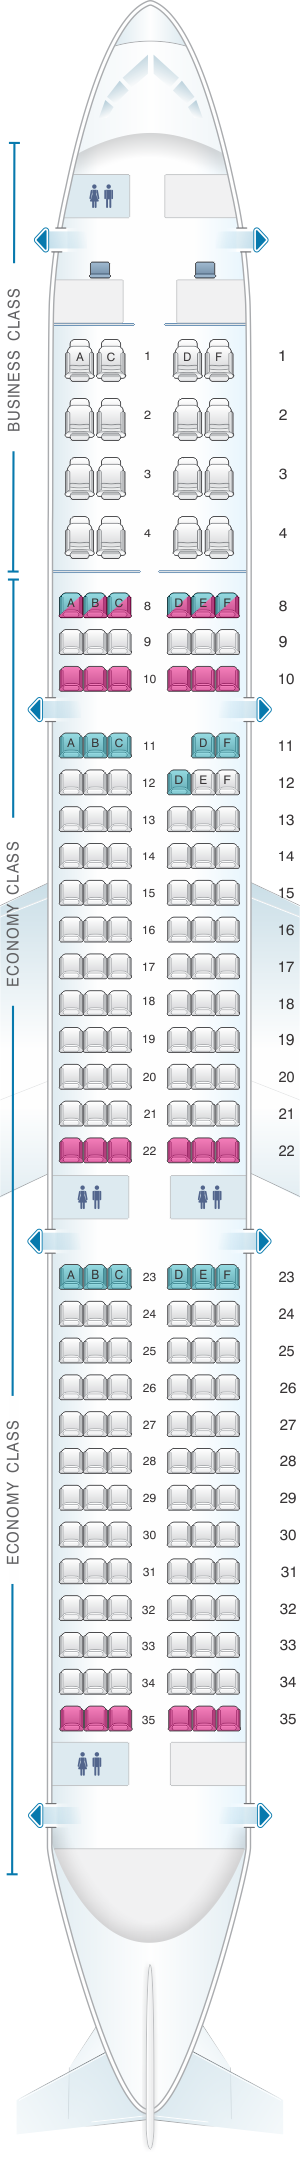 Seat map for Aeroflot Russian Airlines Airbus A321 Config.2